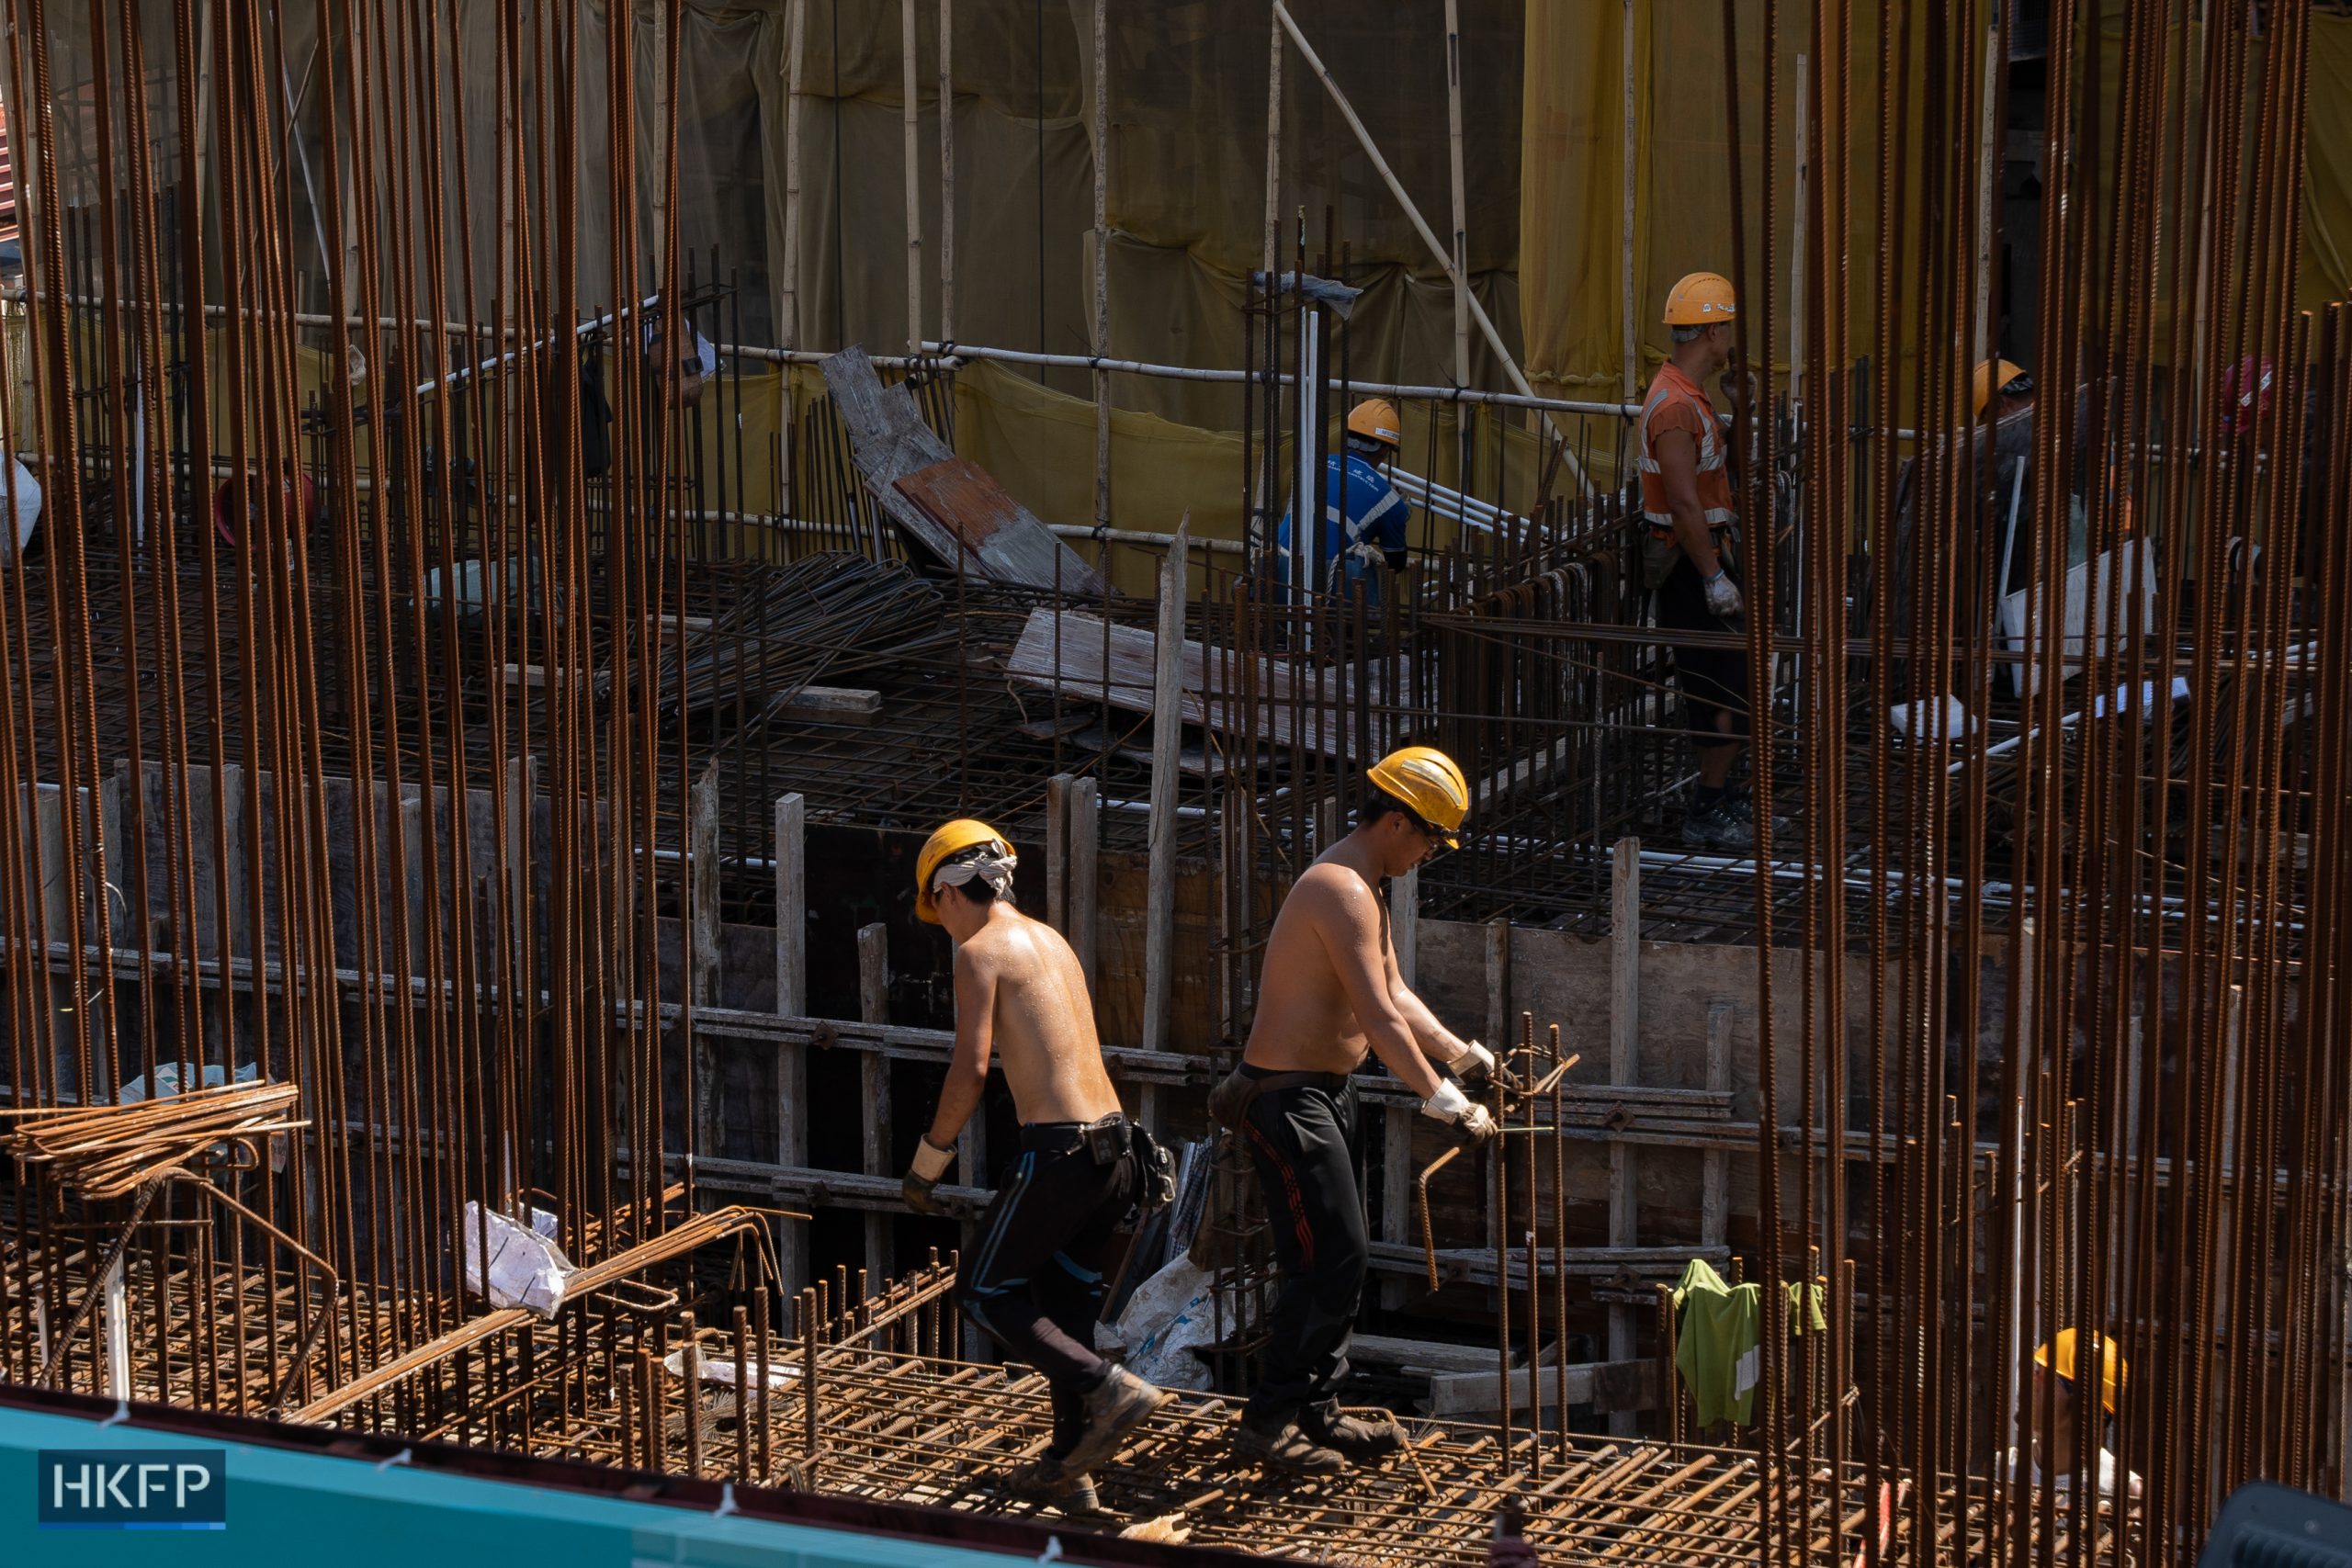 Construction workers work in hot weather in Hong Kong on August 16, 2023. Hong Kong introduced a heatstroke warning system for outdoor workers, the city has sweated through its hottest summer since records began in 1884, according to the Hong Kong Observatory (HKO). Photo: Kyle Lam/HKFP.